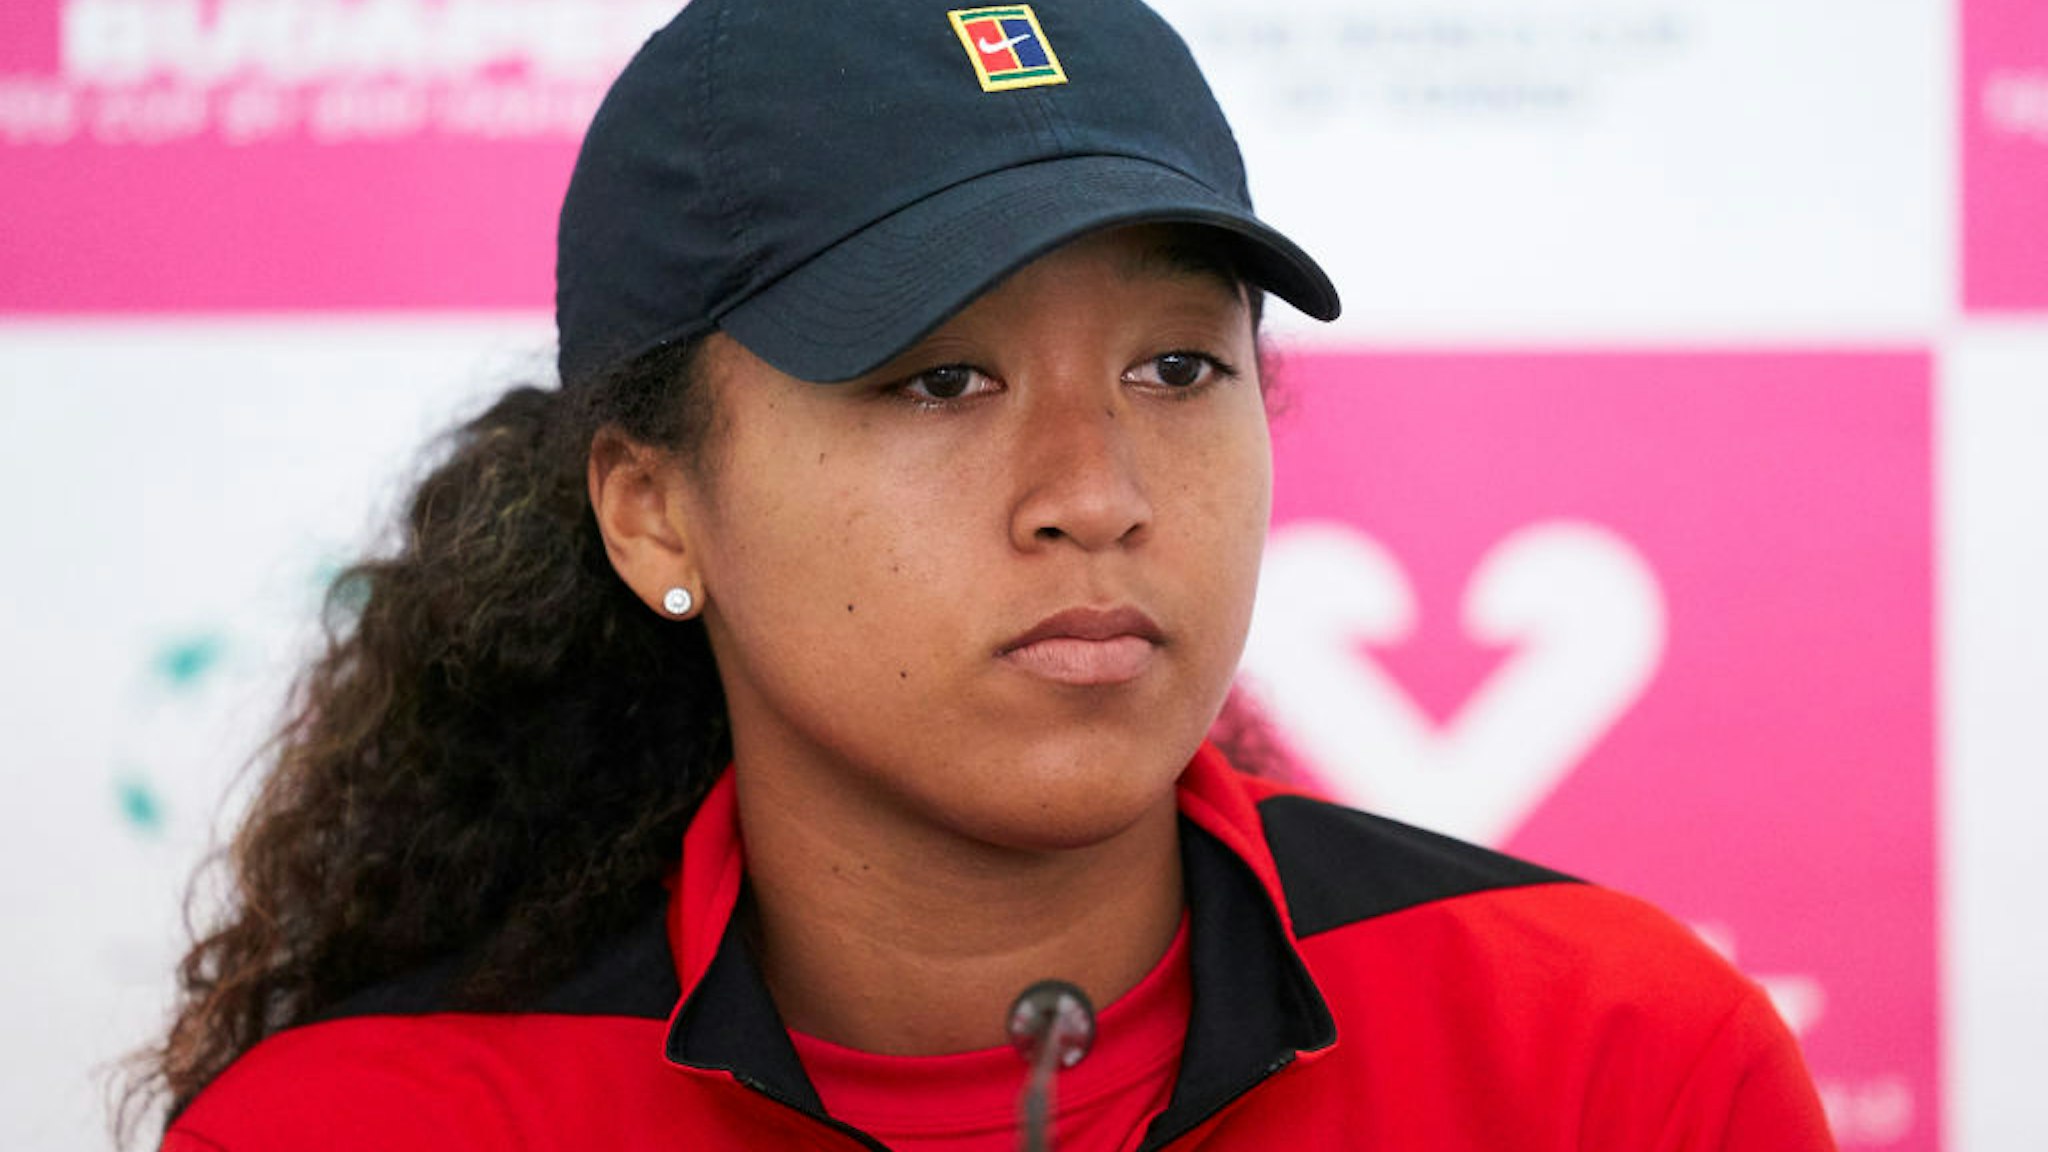 Naomi Osaka of Japan attends the press conference after her match against Sara Sorribes of Spain during the 2020 Fed Cup Qualifier between Spain and Japan at Centro de Tenis La Manga Club on February 07, 2020 in Cartagena, Spain.